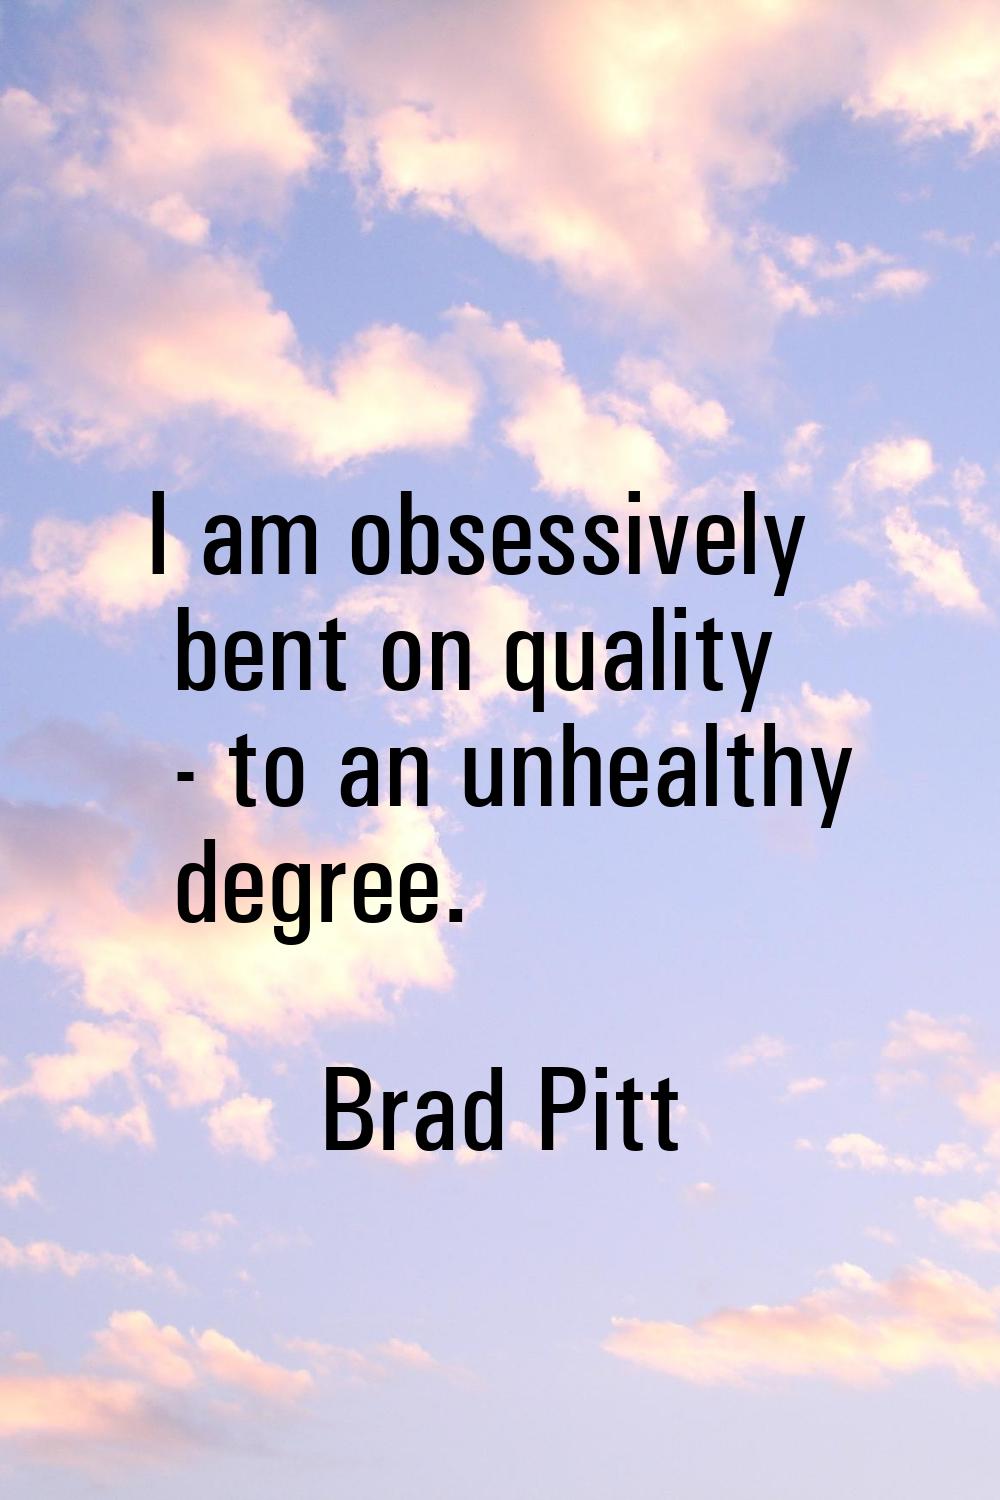 I am obsessively bent on quality - to an unhealthy degree.